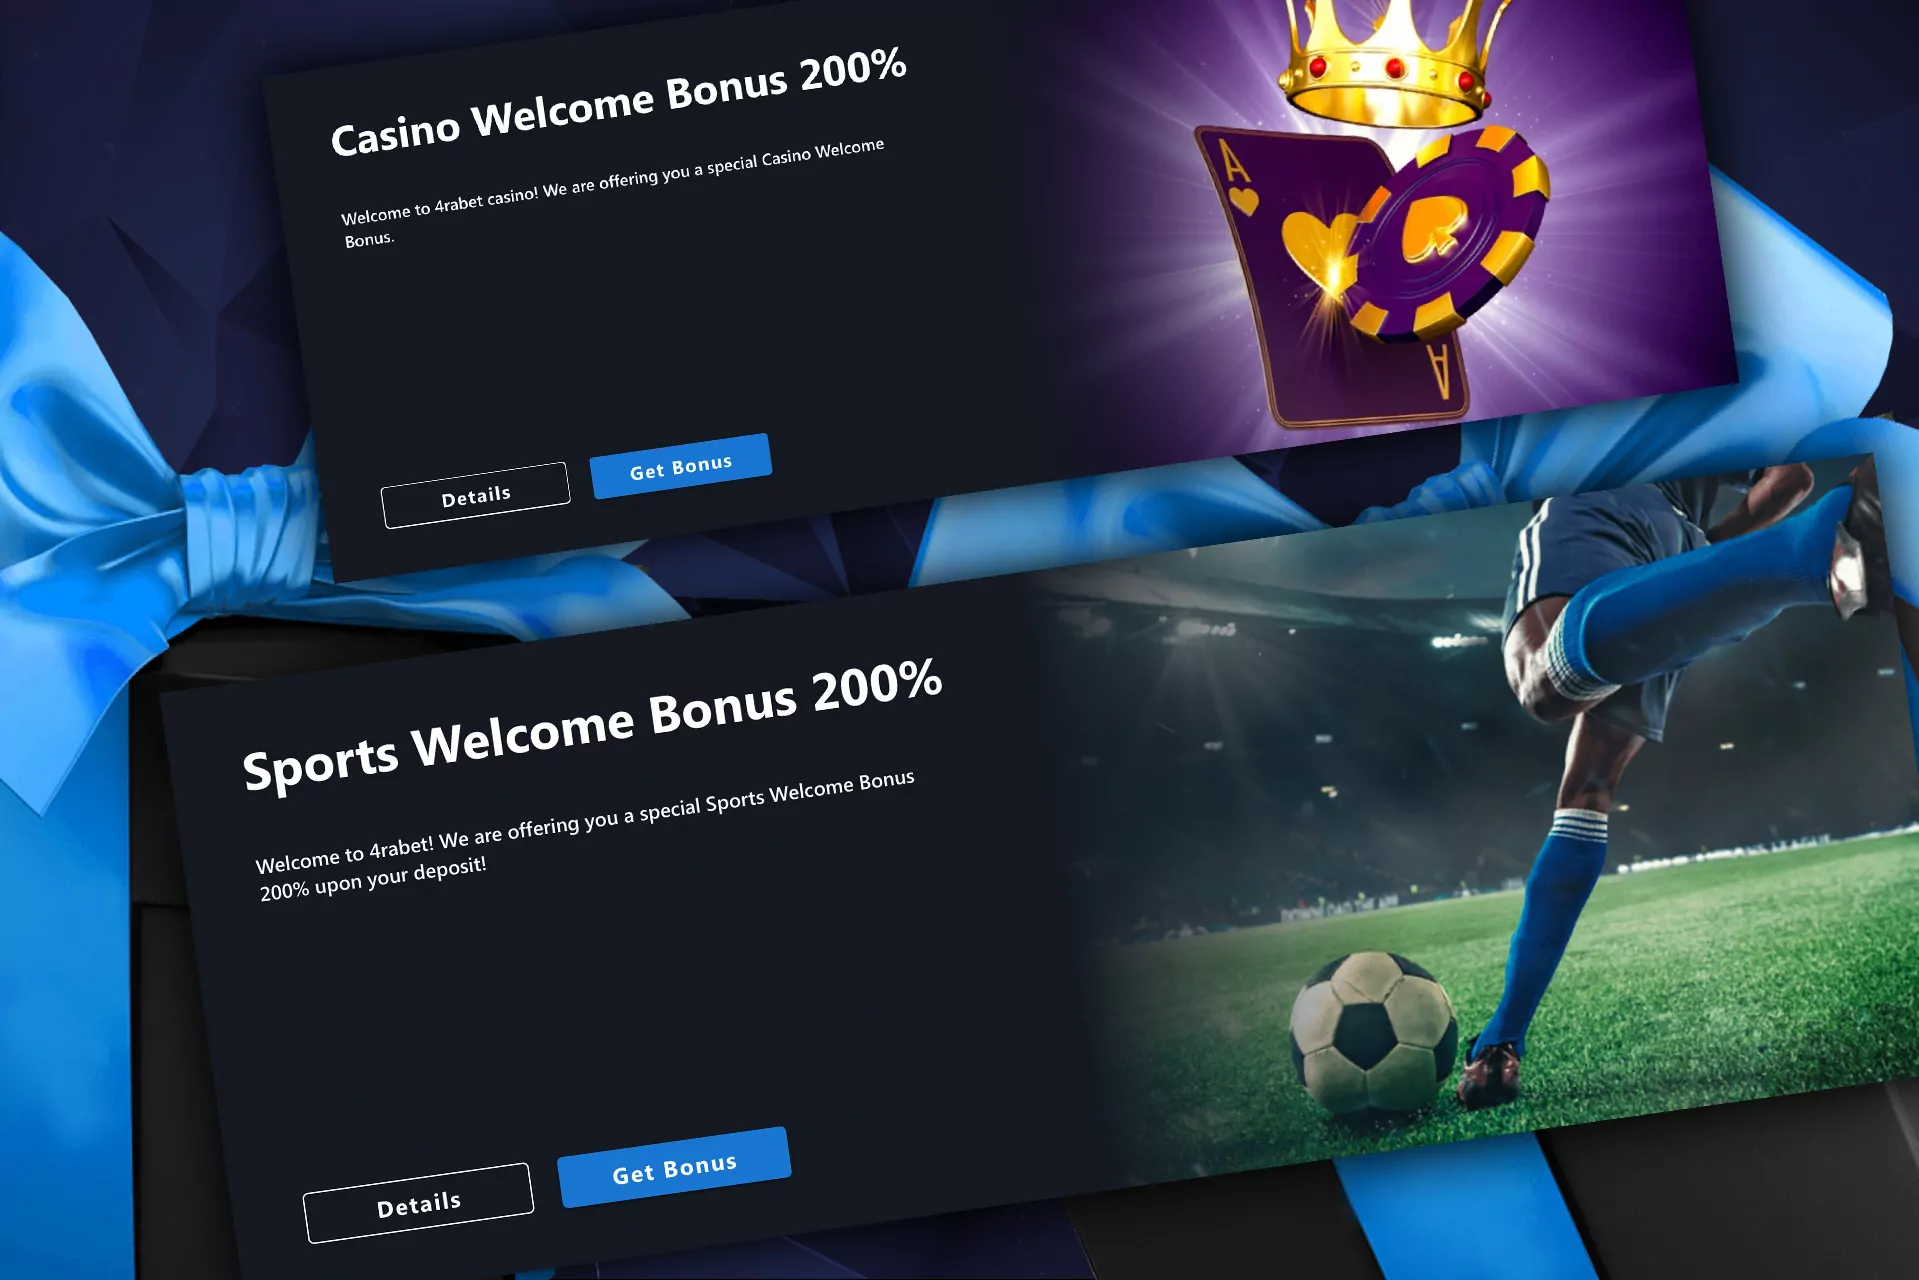 By completing the registration before the end, you can expect to receive a welcome bonus of your choice: either sports or casino.